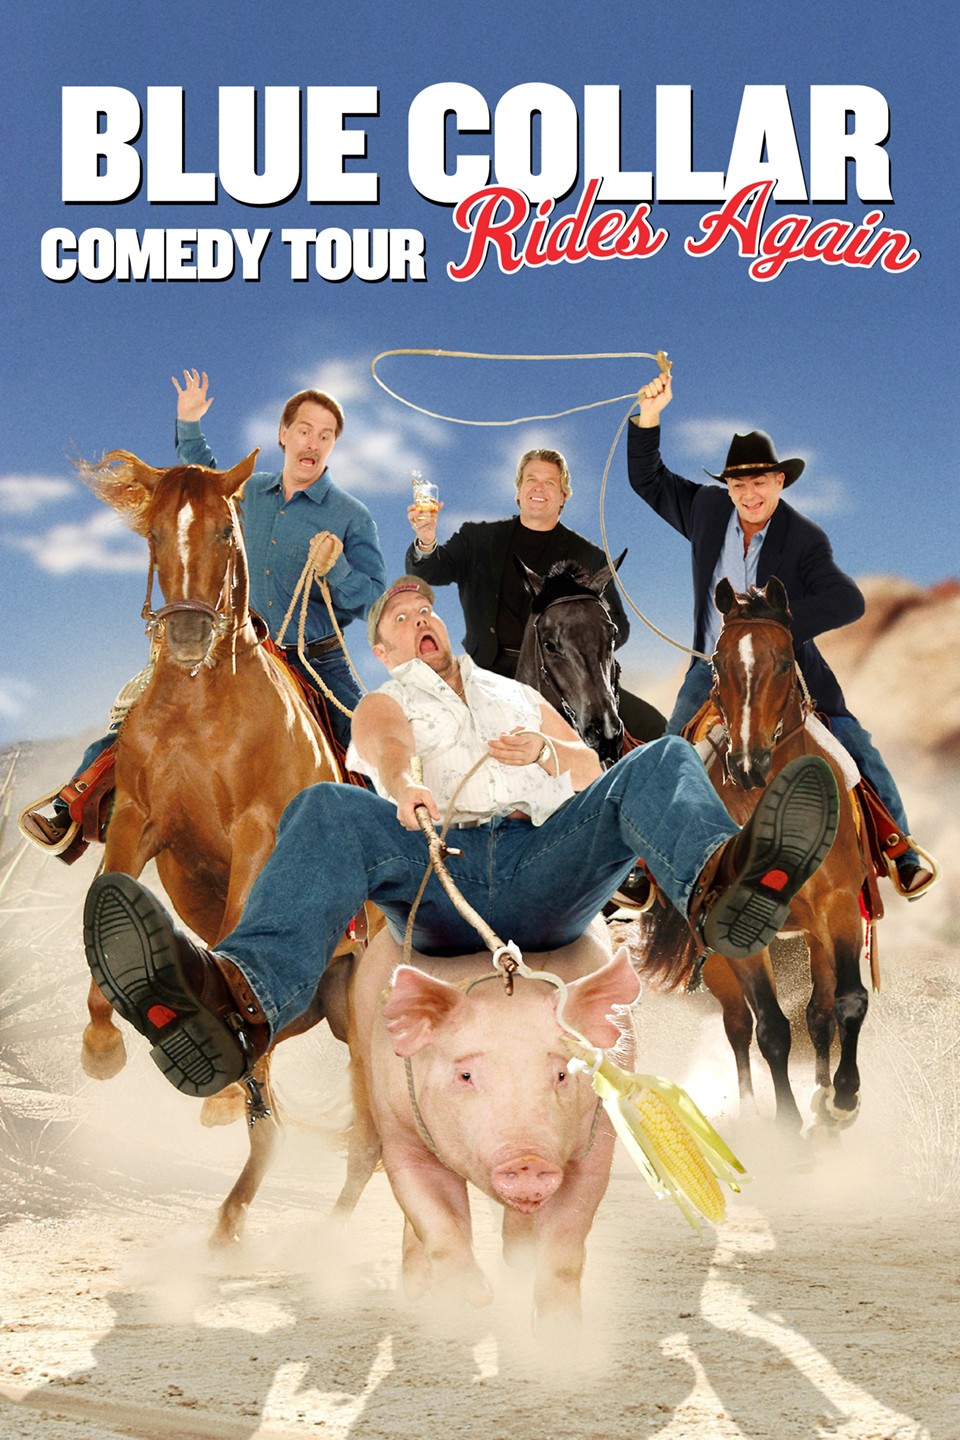 Blue Collar Comedy Tour 2025 promotional poster featuring the comedians